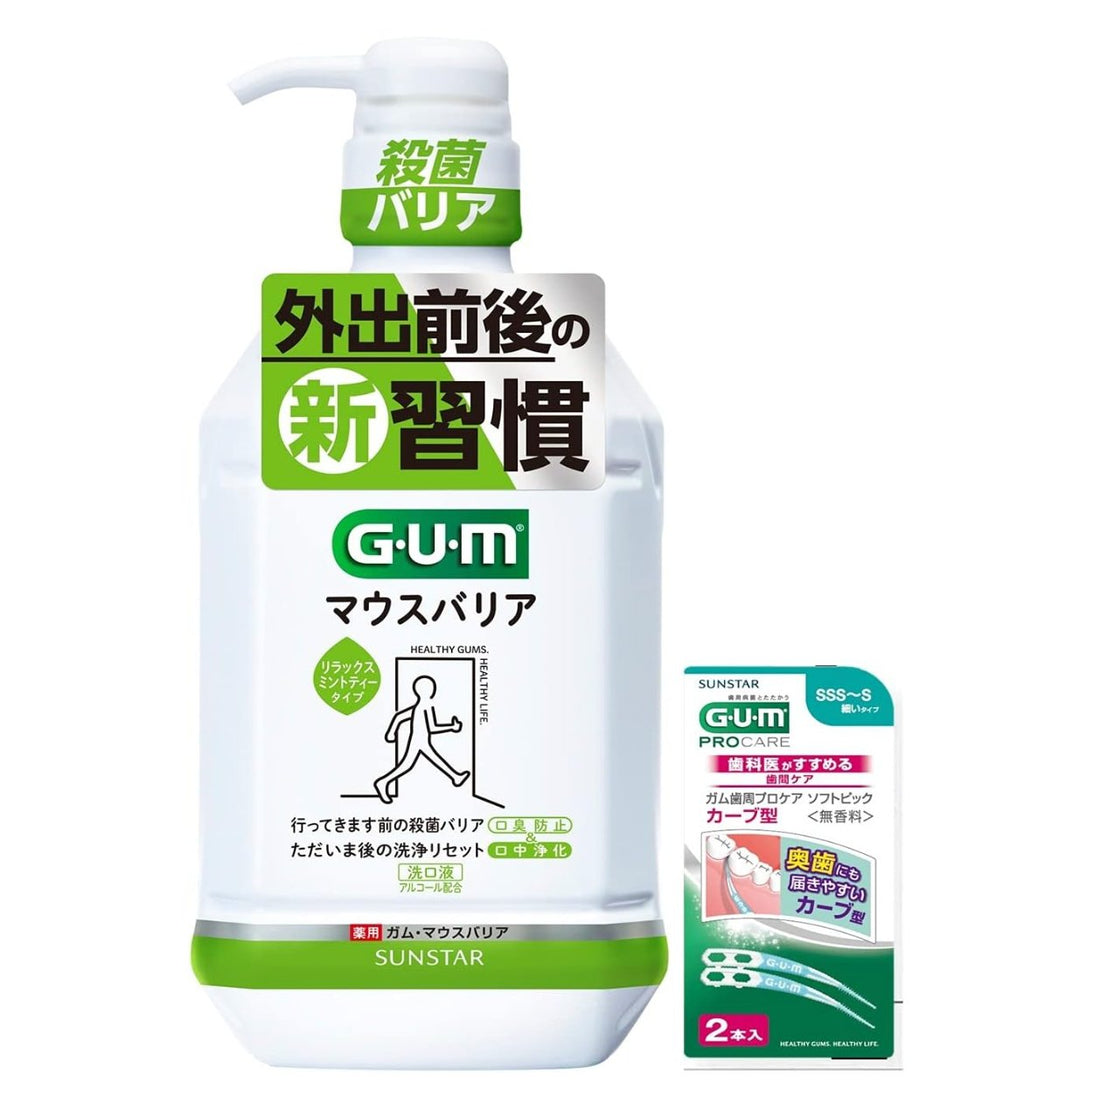 GUM [Quasi-drug] Mouthwash, Mouth Barrier, Medicated Mouth Wash, Contains CPC, Sterilizes and cleans your mouth for a long time, Prevents bad breath [Relaxing mint tea type, Contains alcohol] &lt;Hagki Care Liquid Dental Rinse&gt; 900ml + bonus - NihonMura